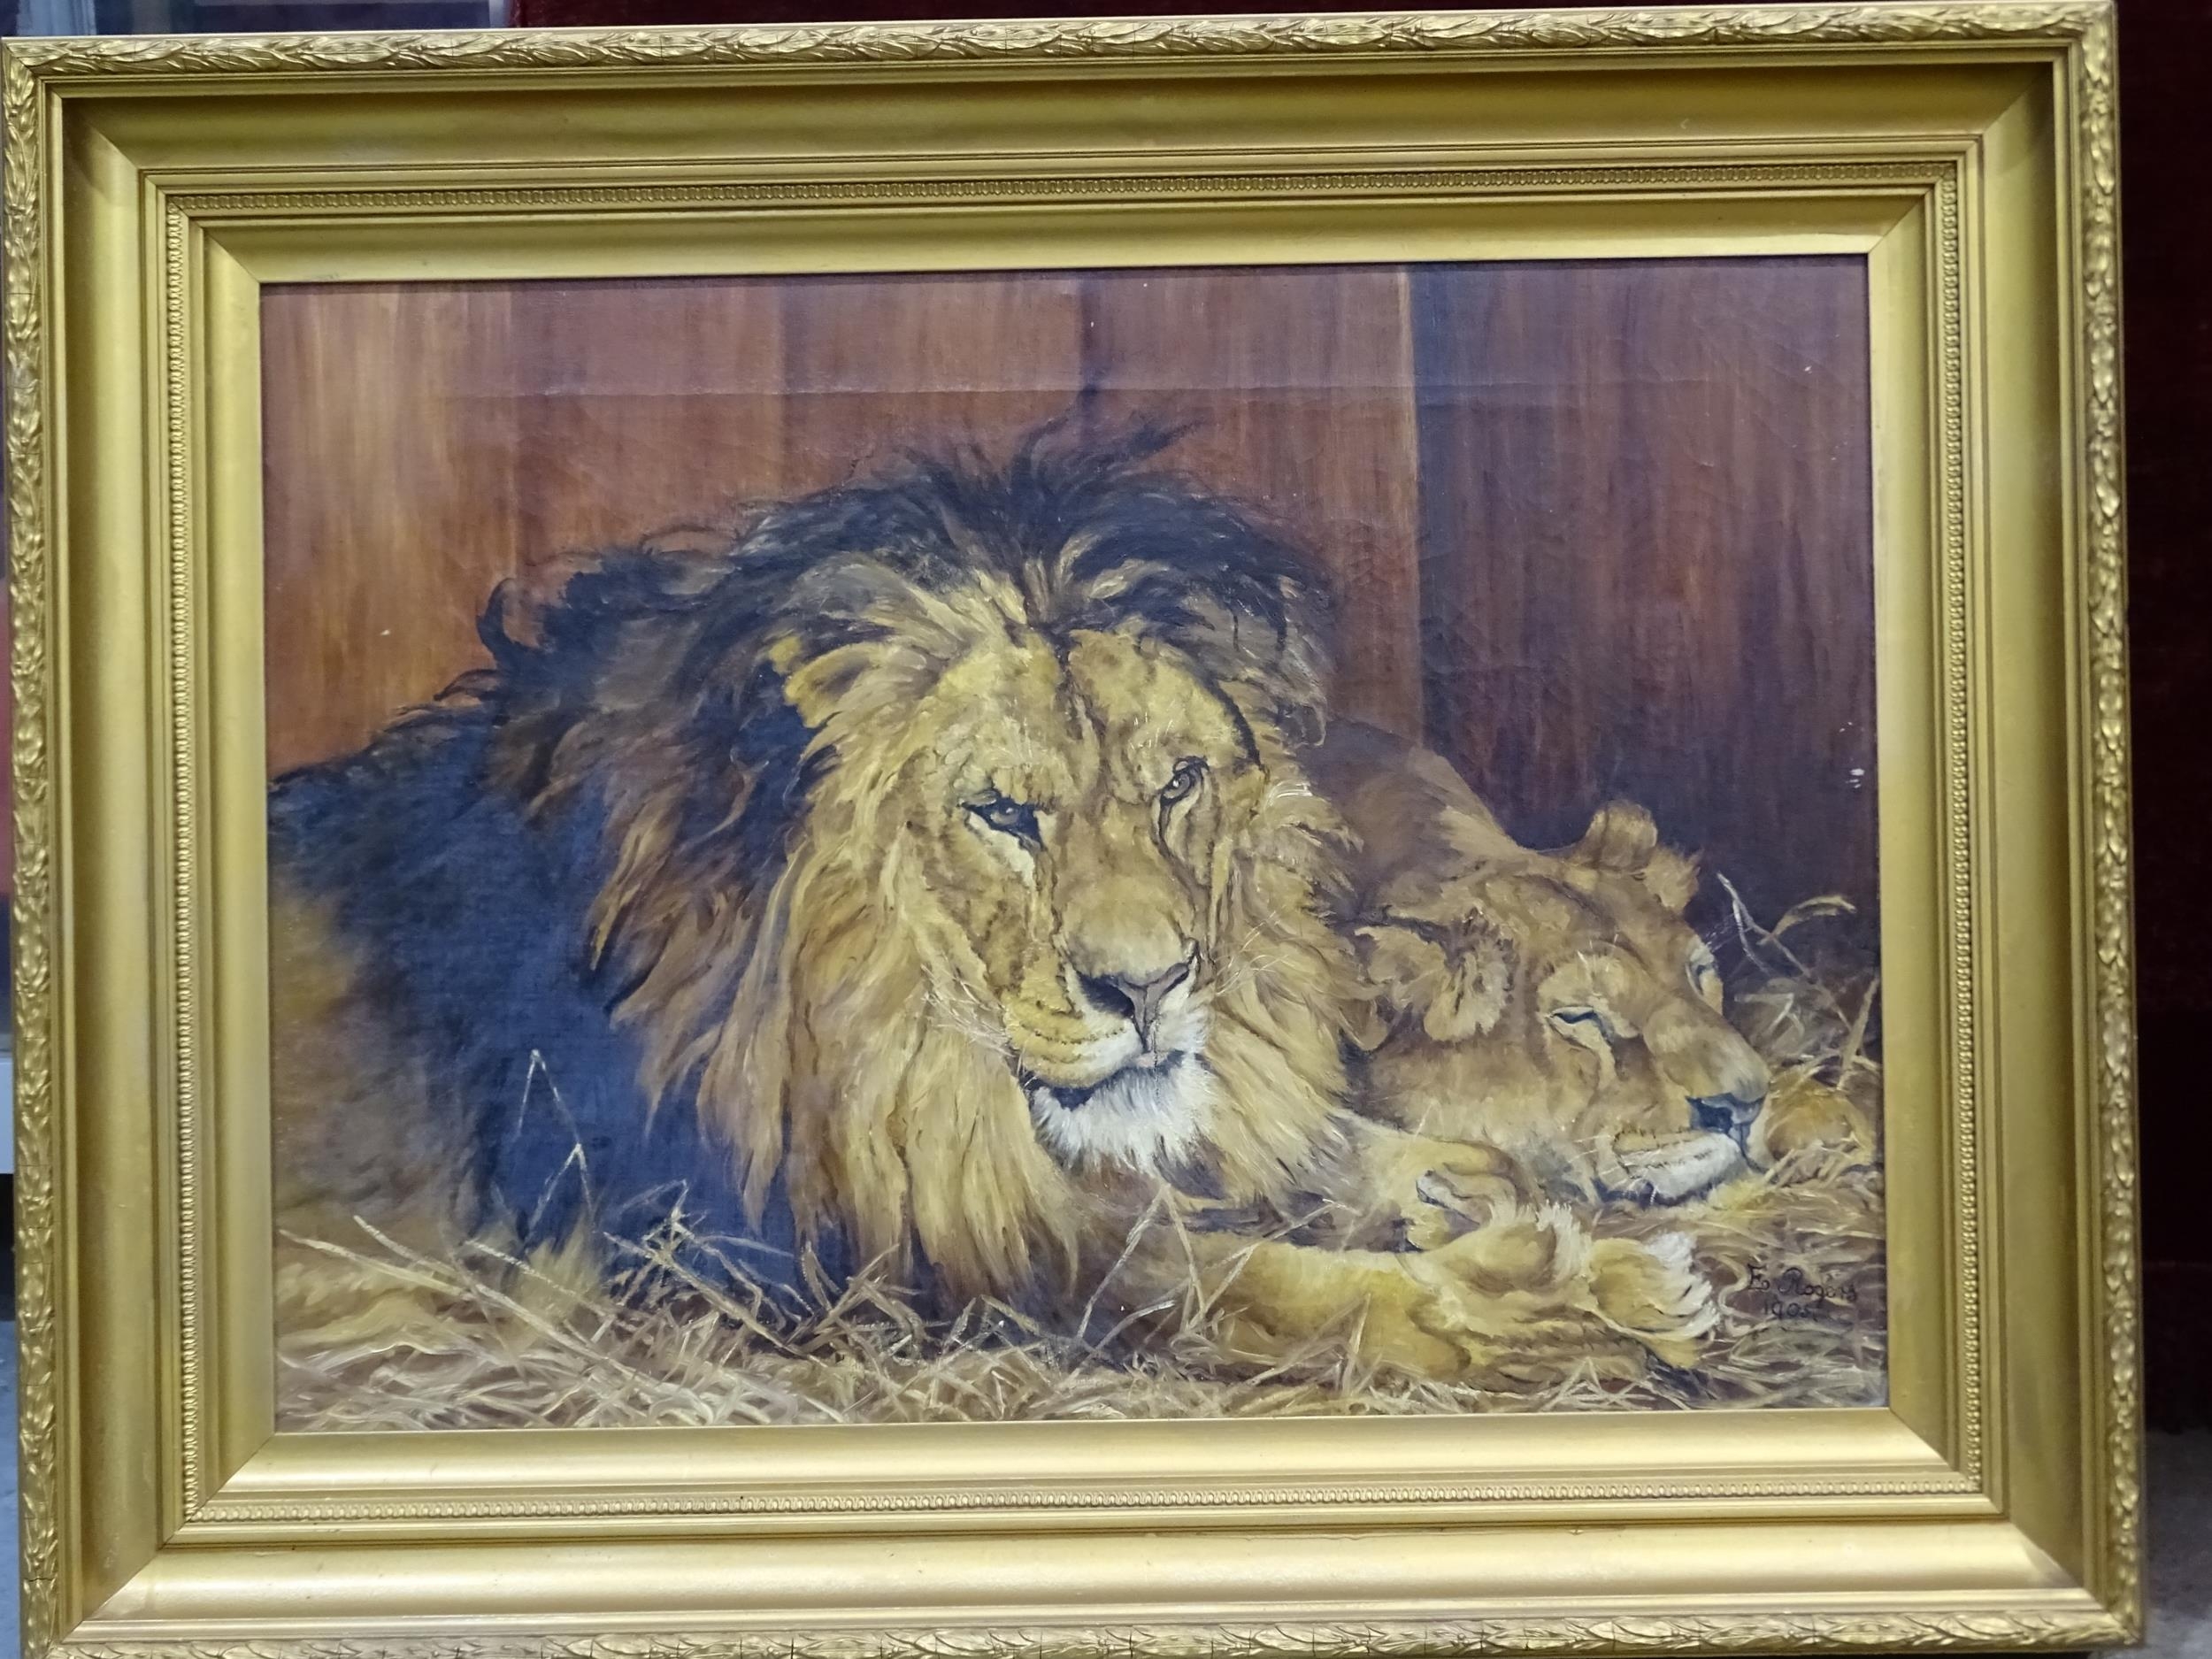 E Rogers, 'Lion and lioness', a signed oil on canvas painting, 53 x 75cm, (tear to centre).